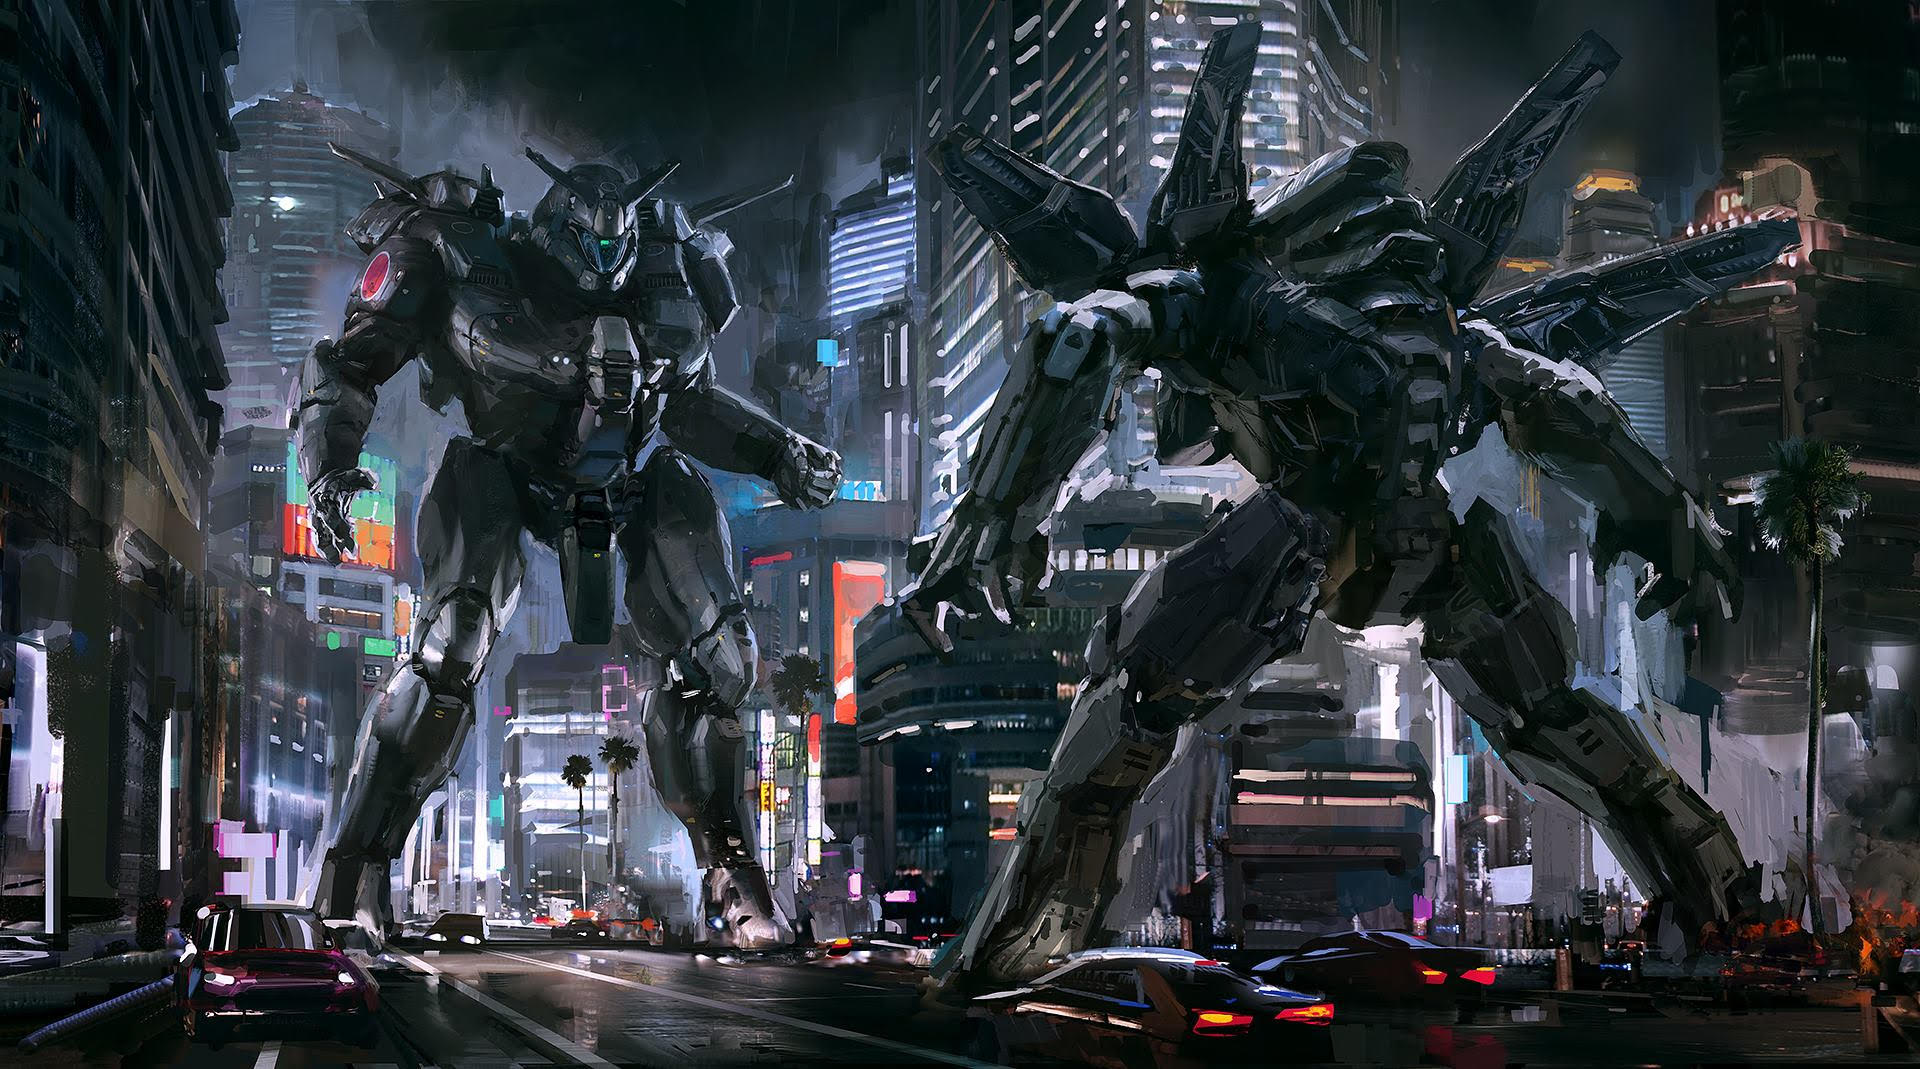 Fine Art: Japan Won WW2, And Now Rules America With Giant Mechs